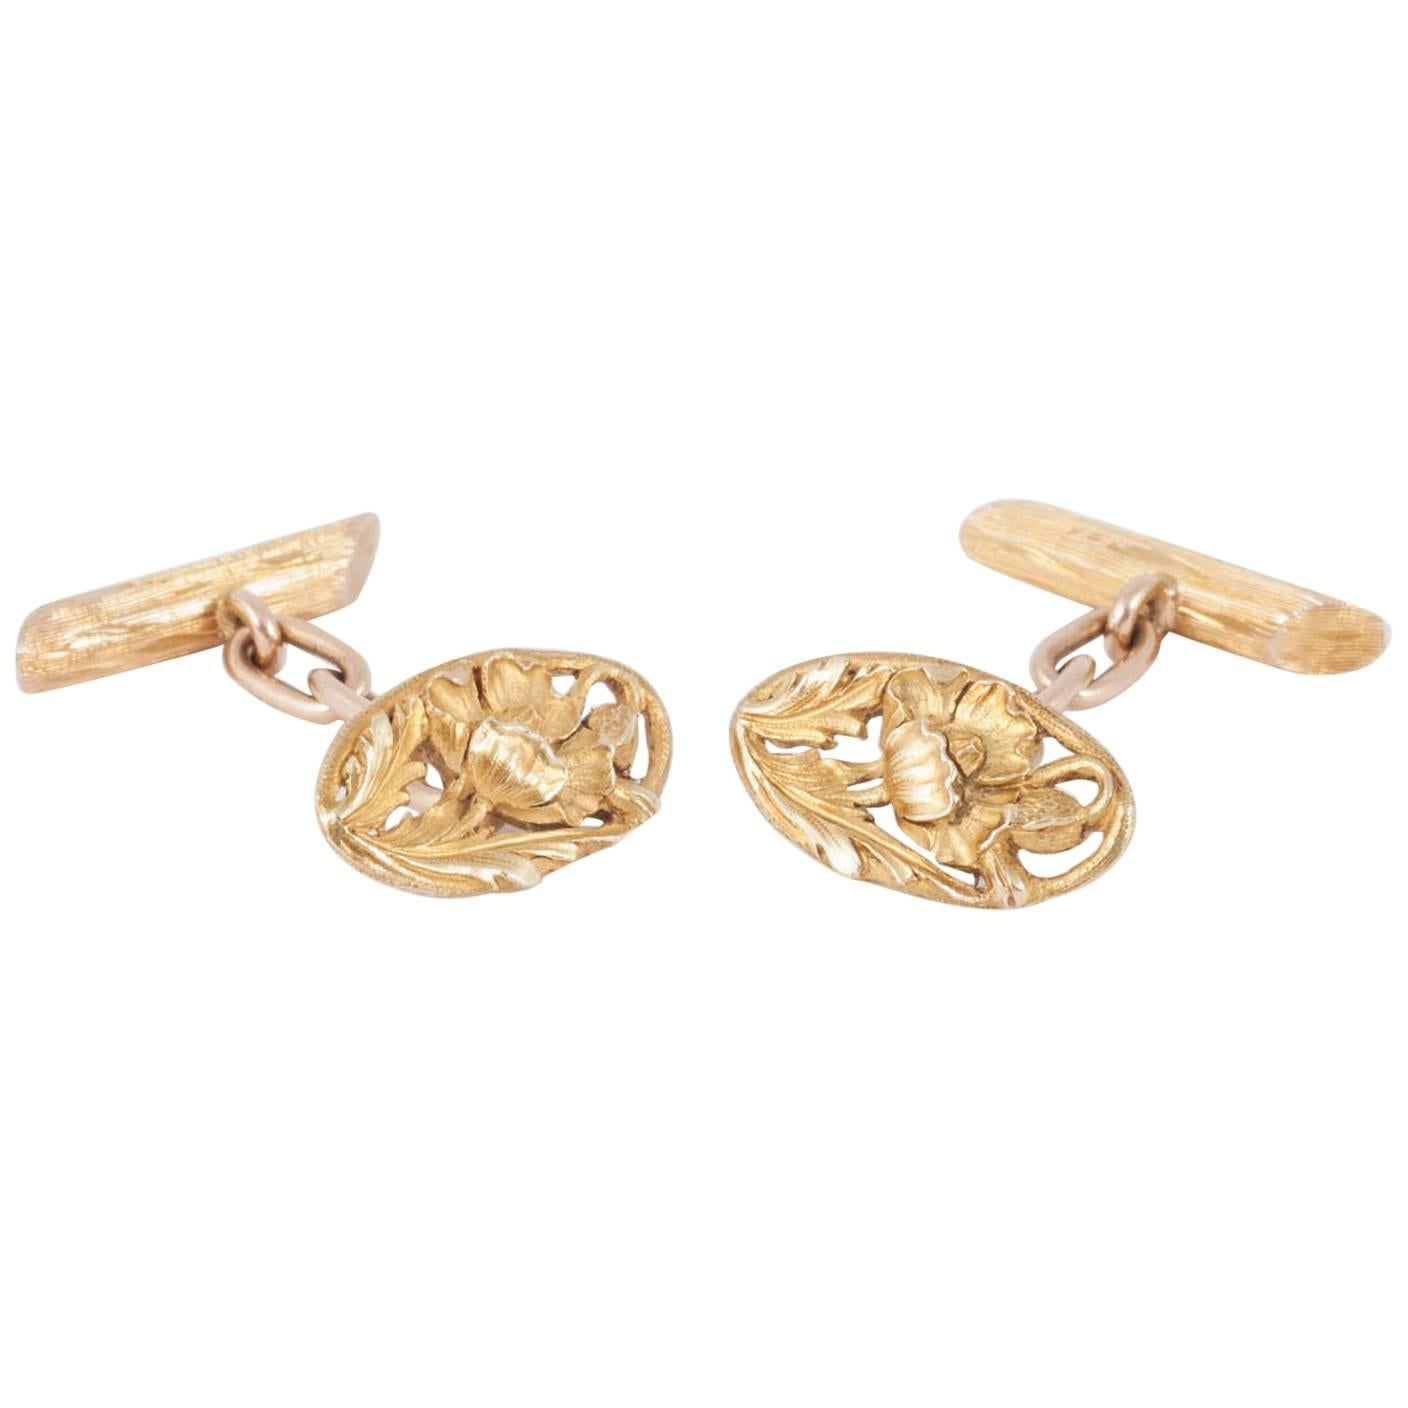 Art Nouveau Cufflinks 18kt Carved Gold Openwork Floral Design, French circa 1900 For Sale